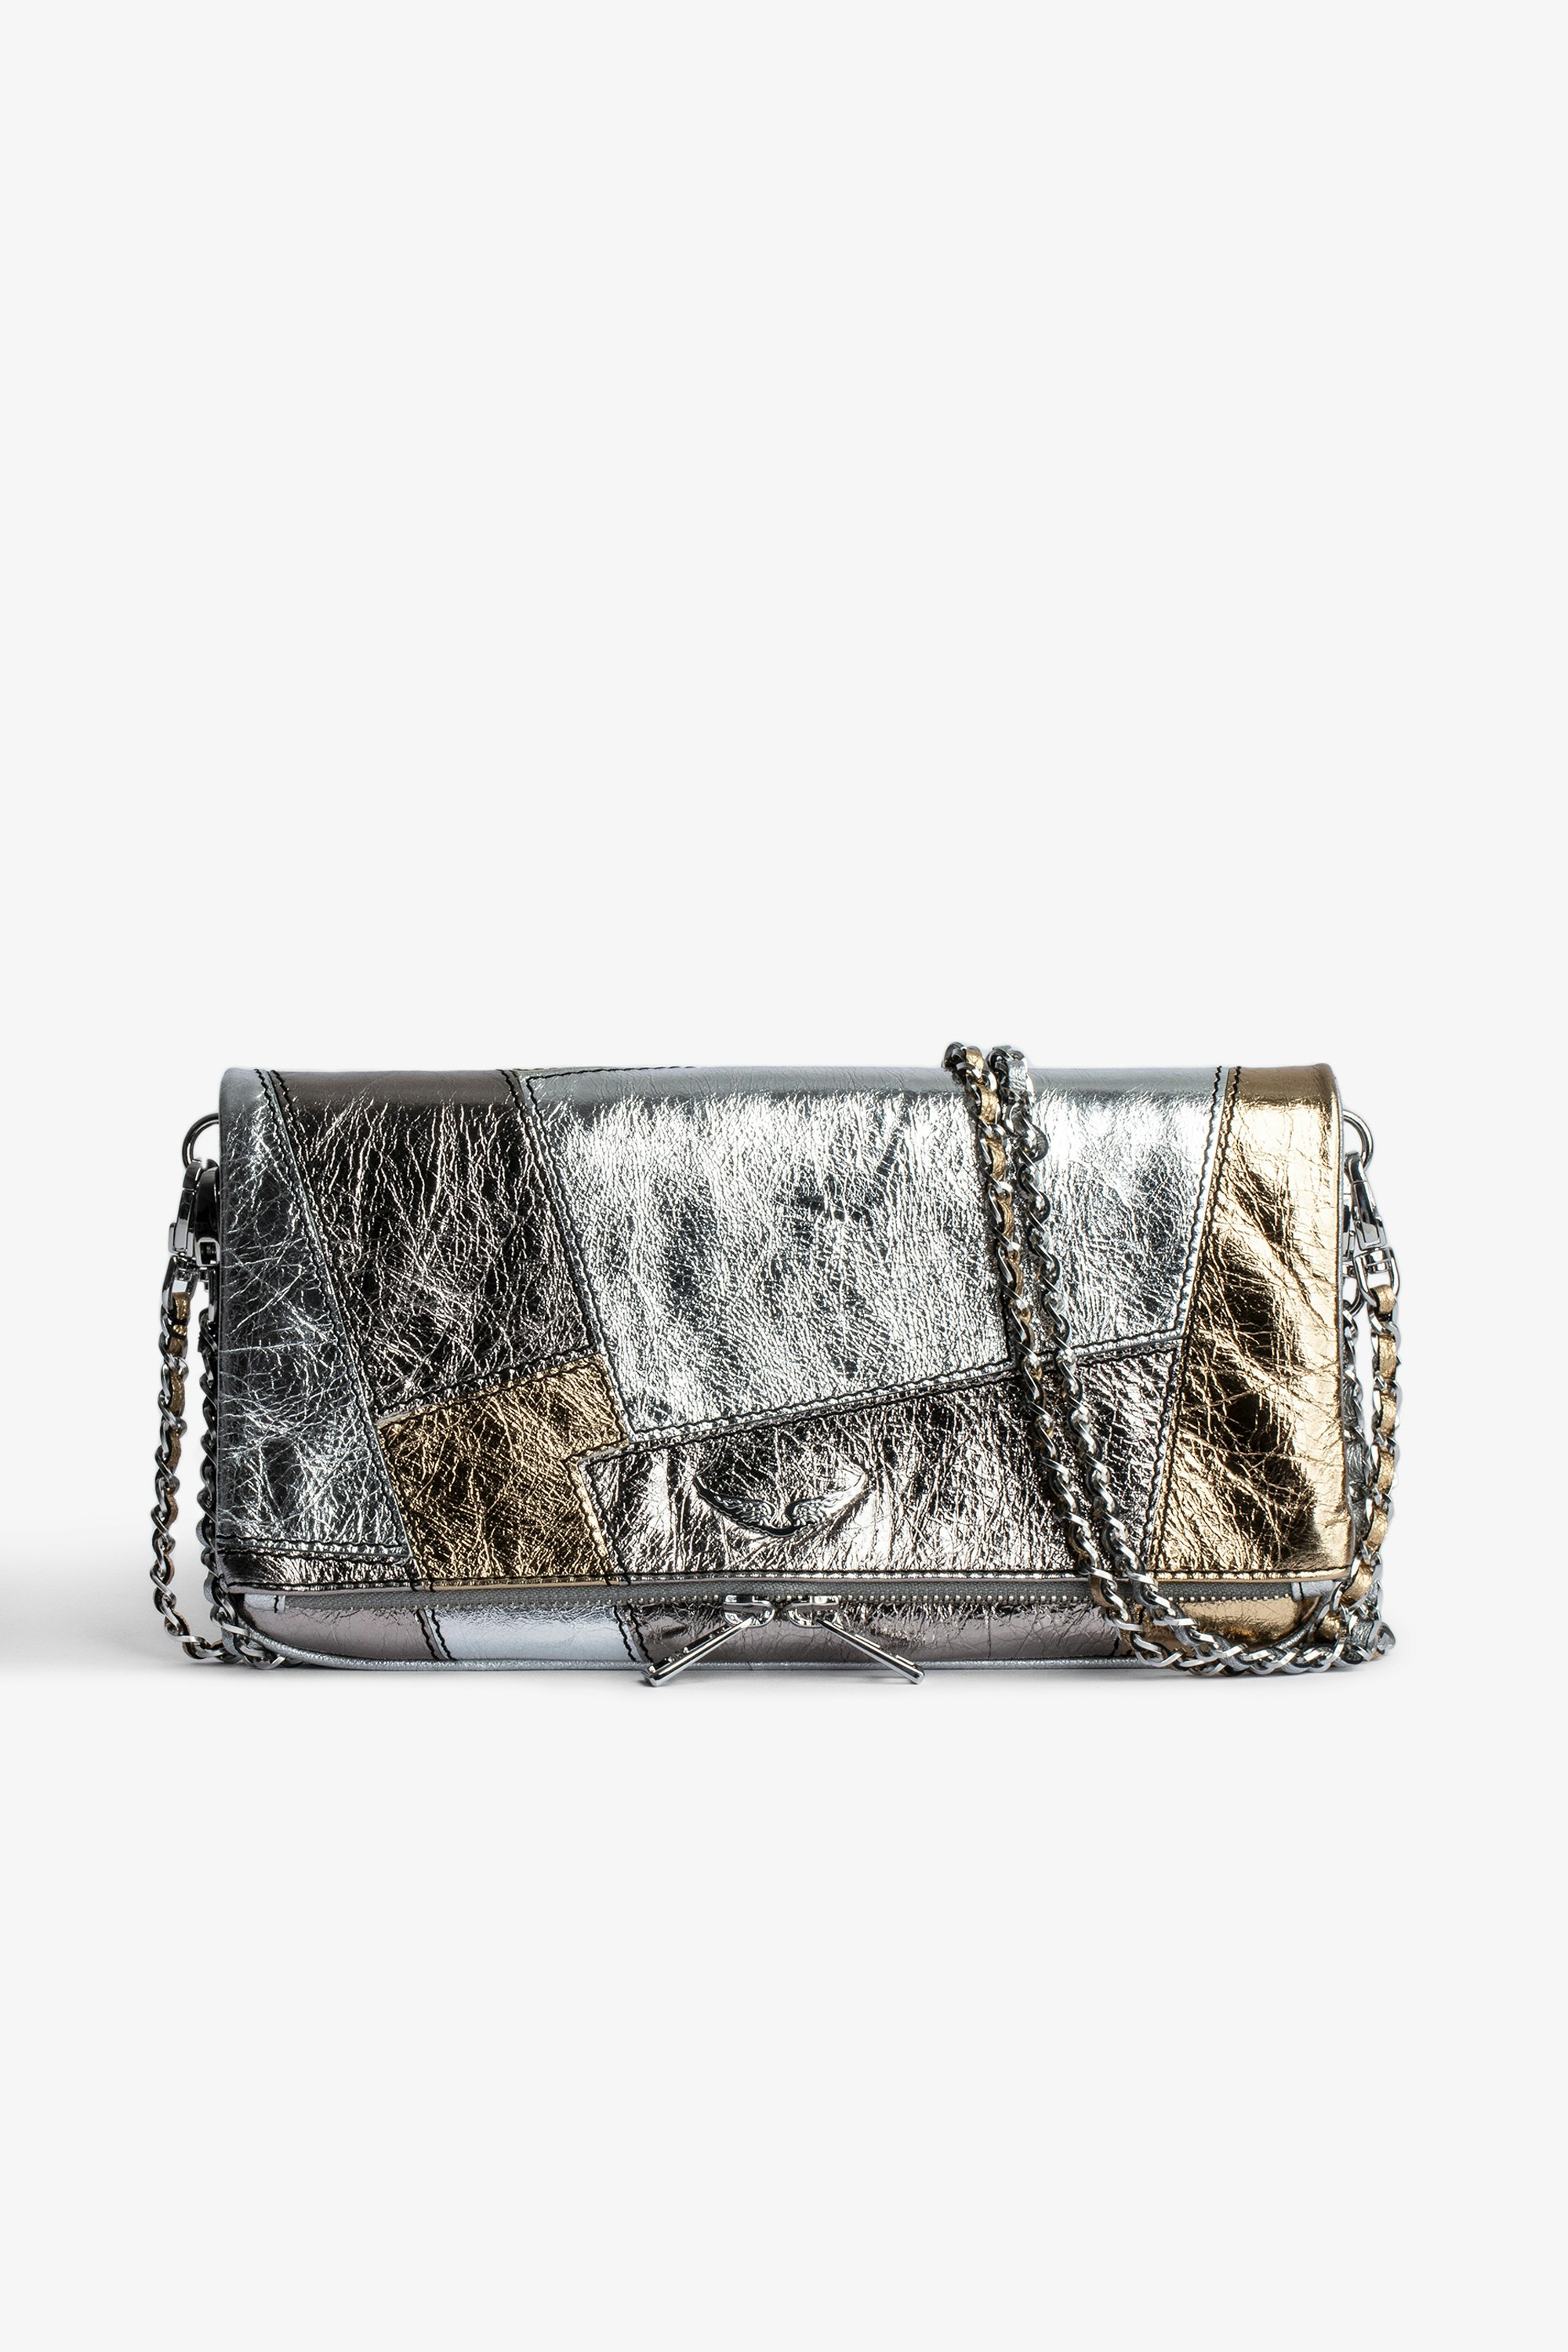 Rock ビンテージ Metal Patchwork クラッチバッグ Women’s clutch bag in silver and gold metallic leather patchwork